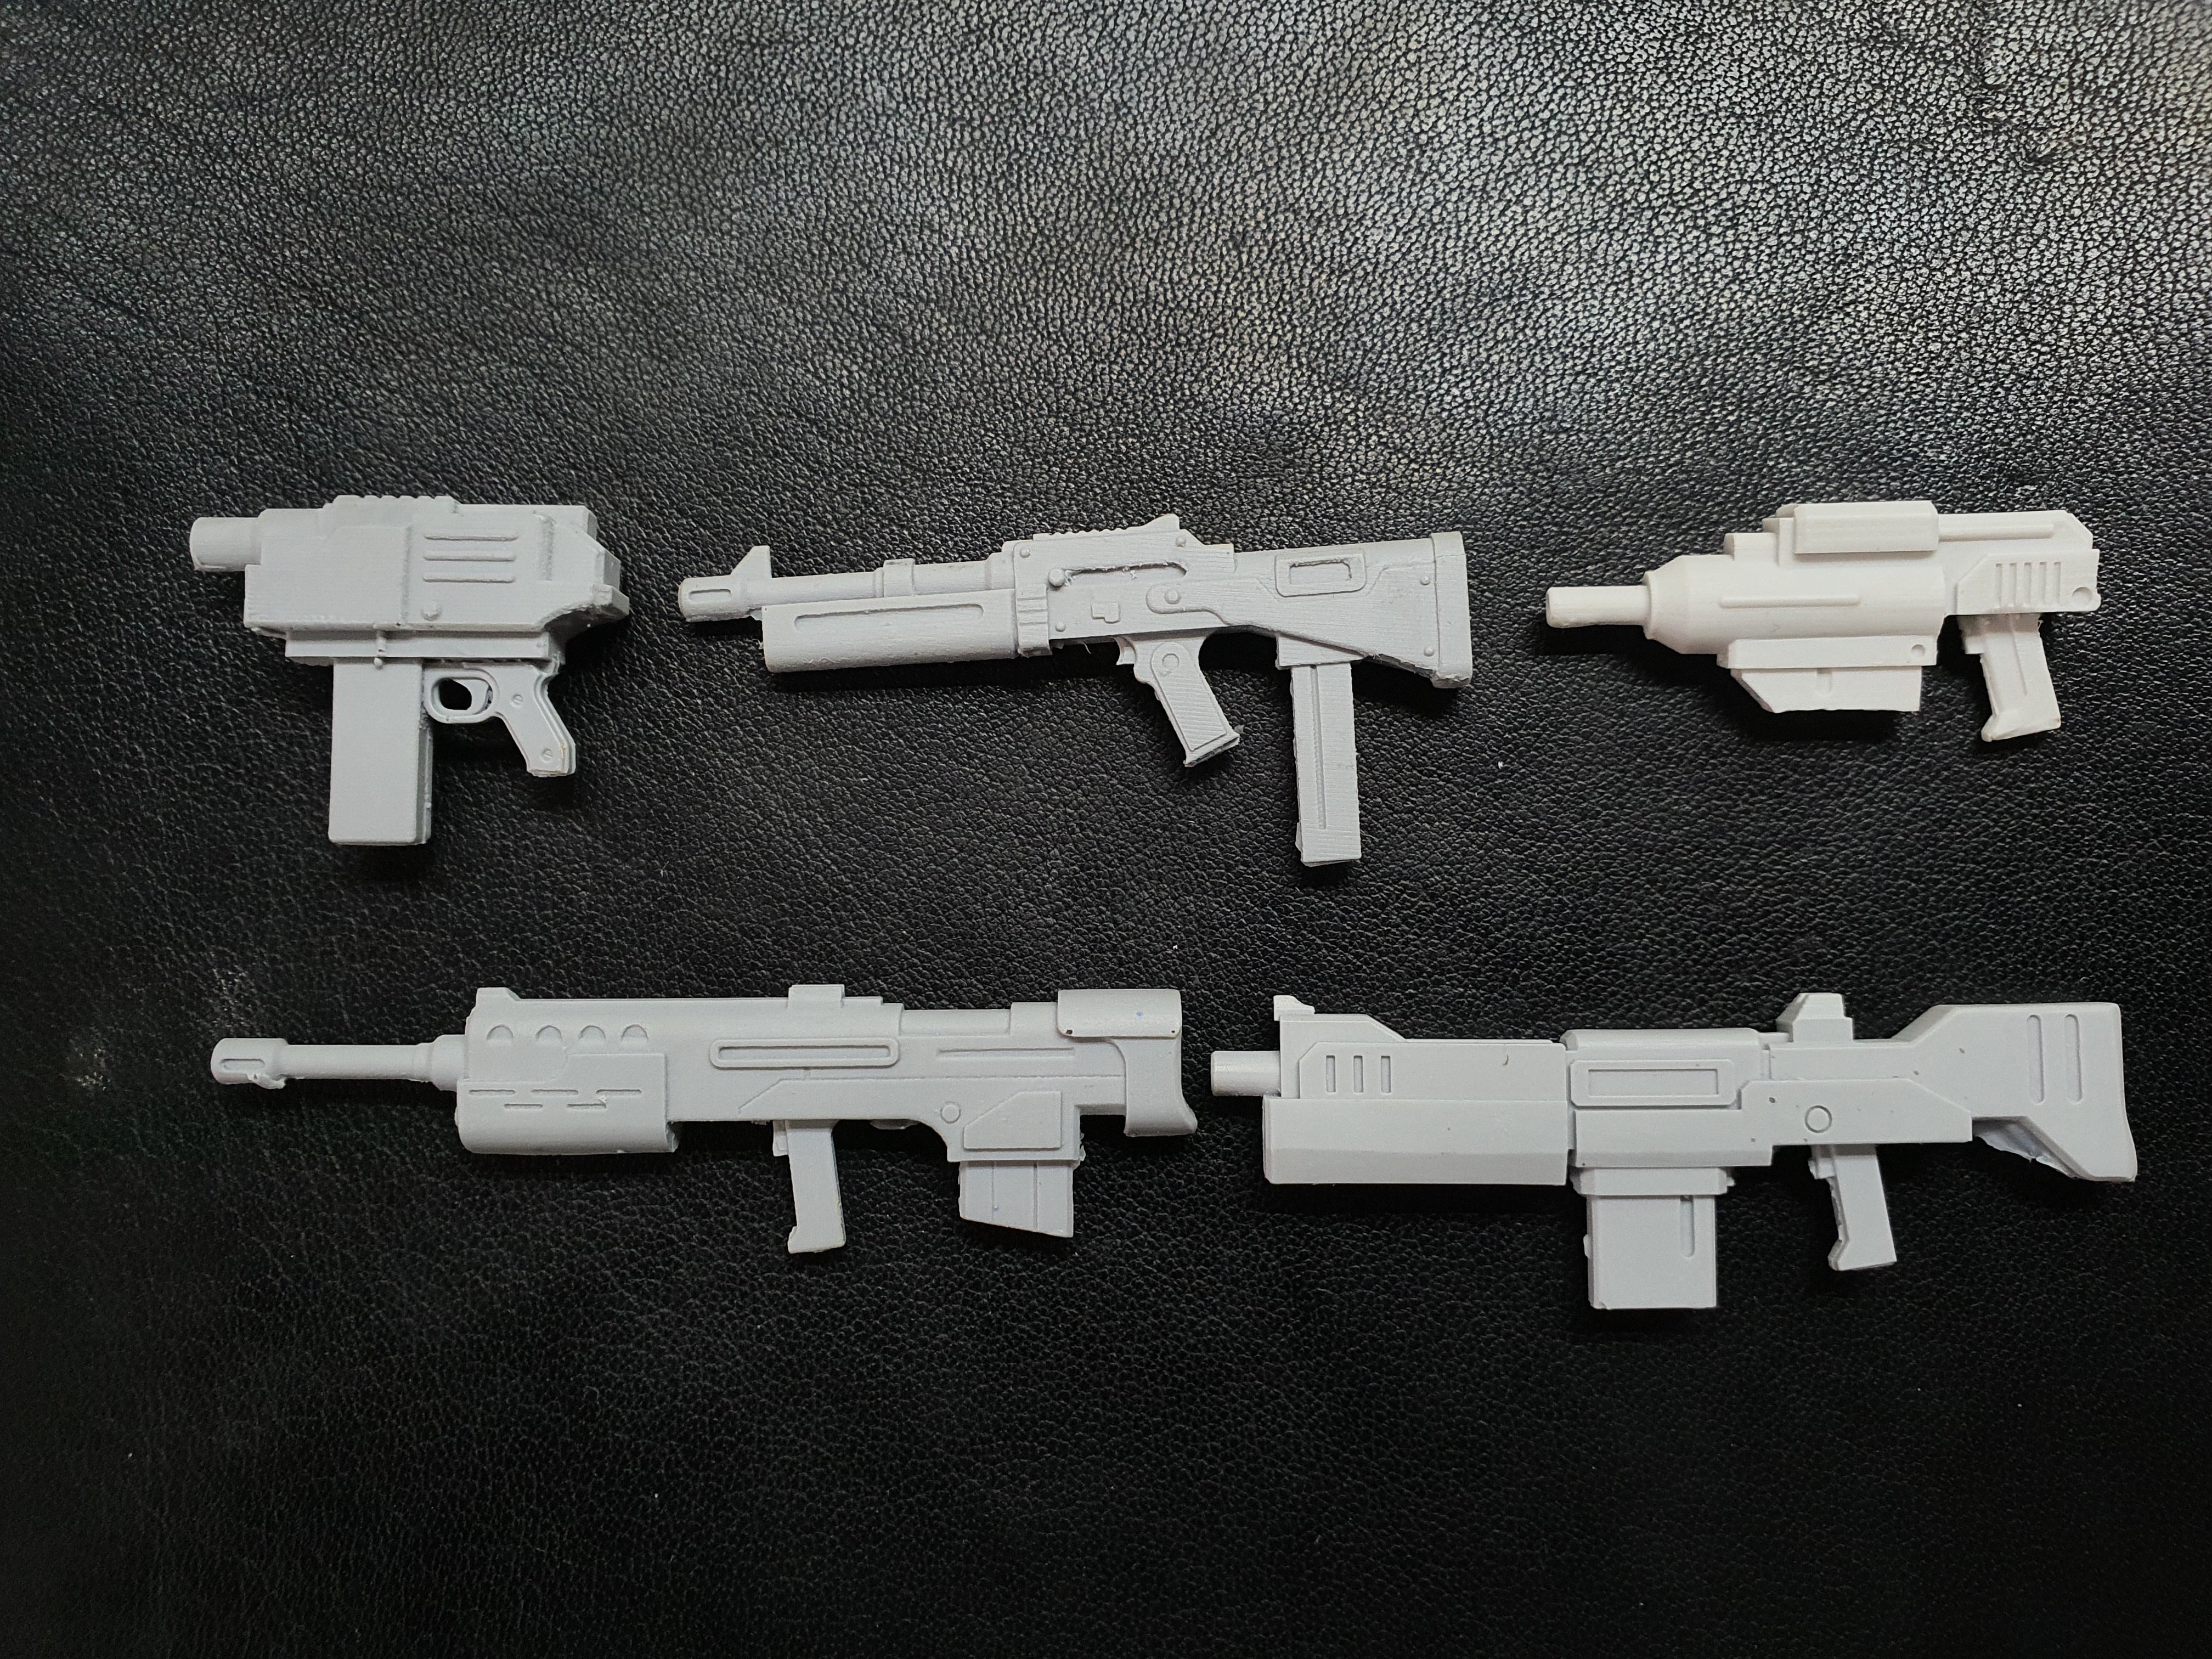 1/12 scale (Assorted Small Arms Bundle)